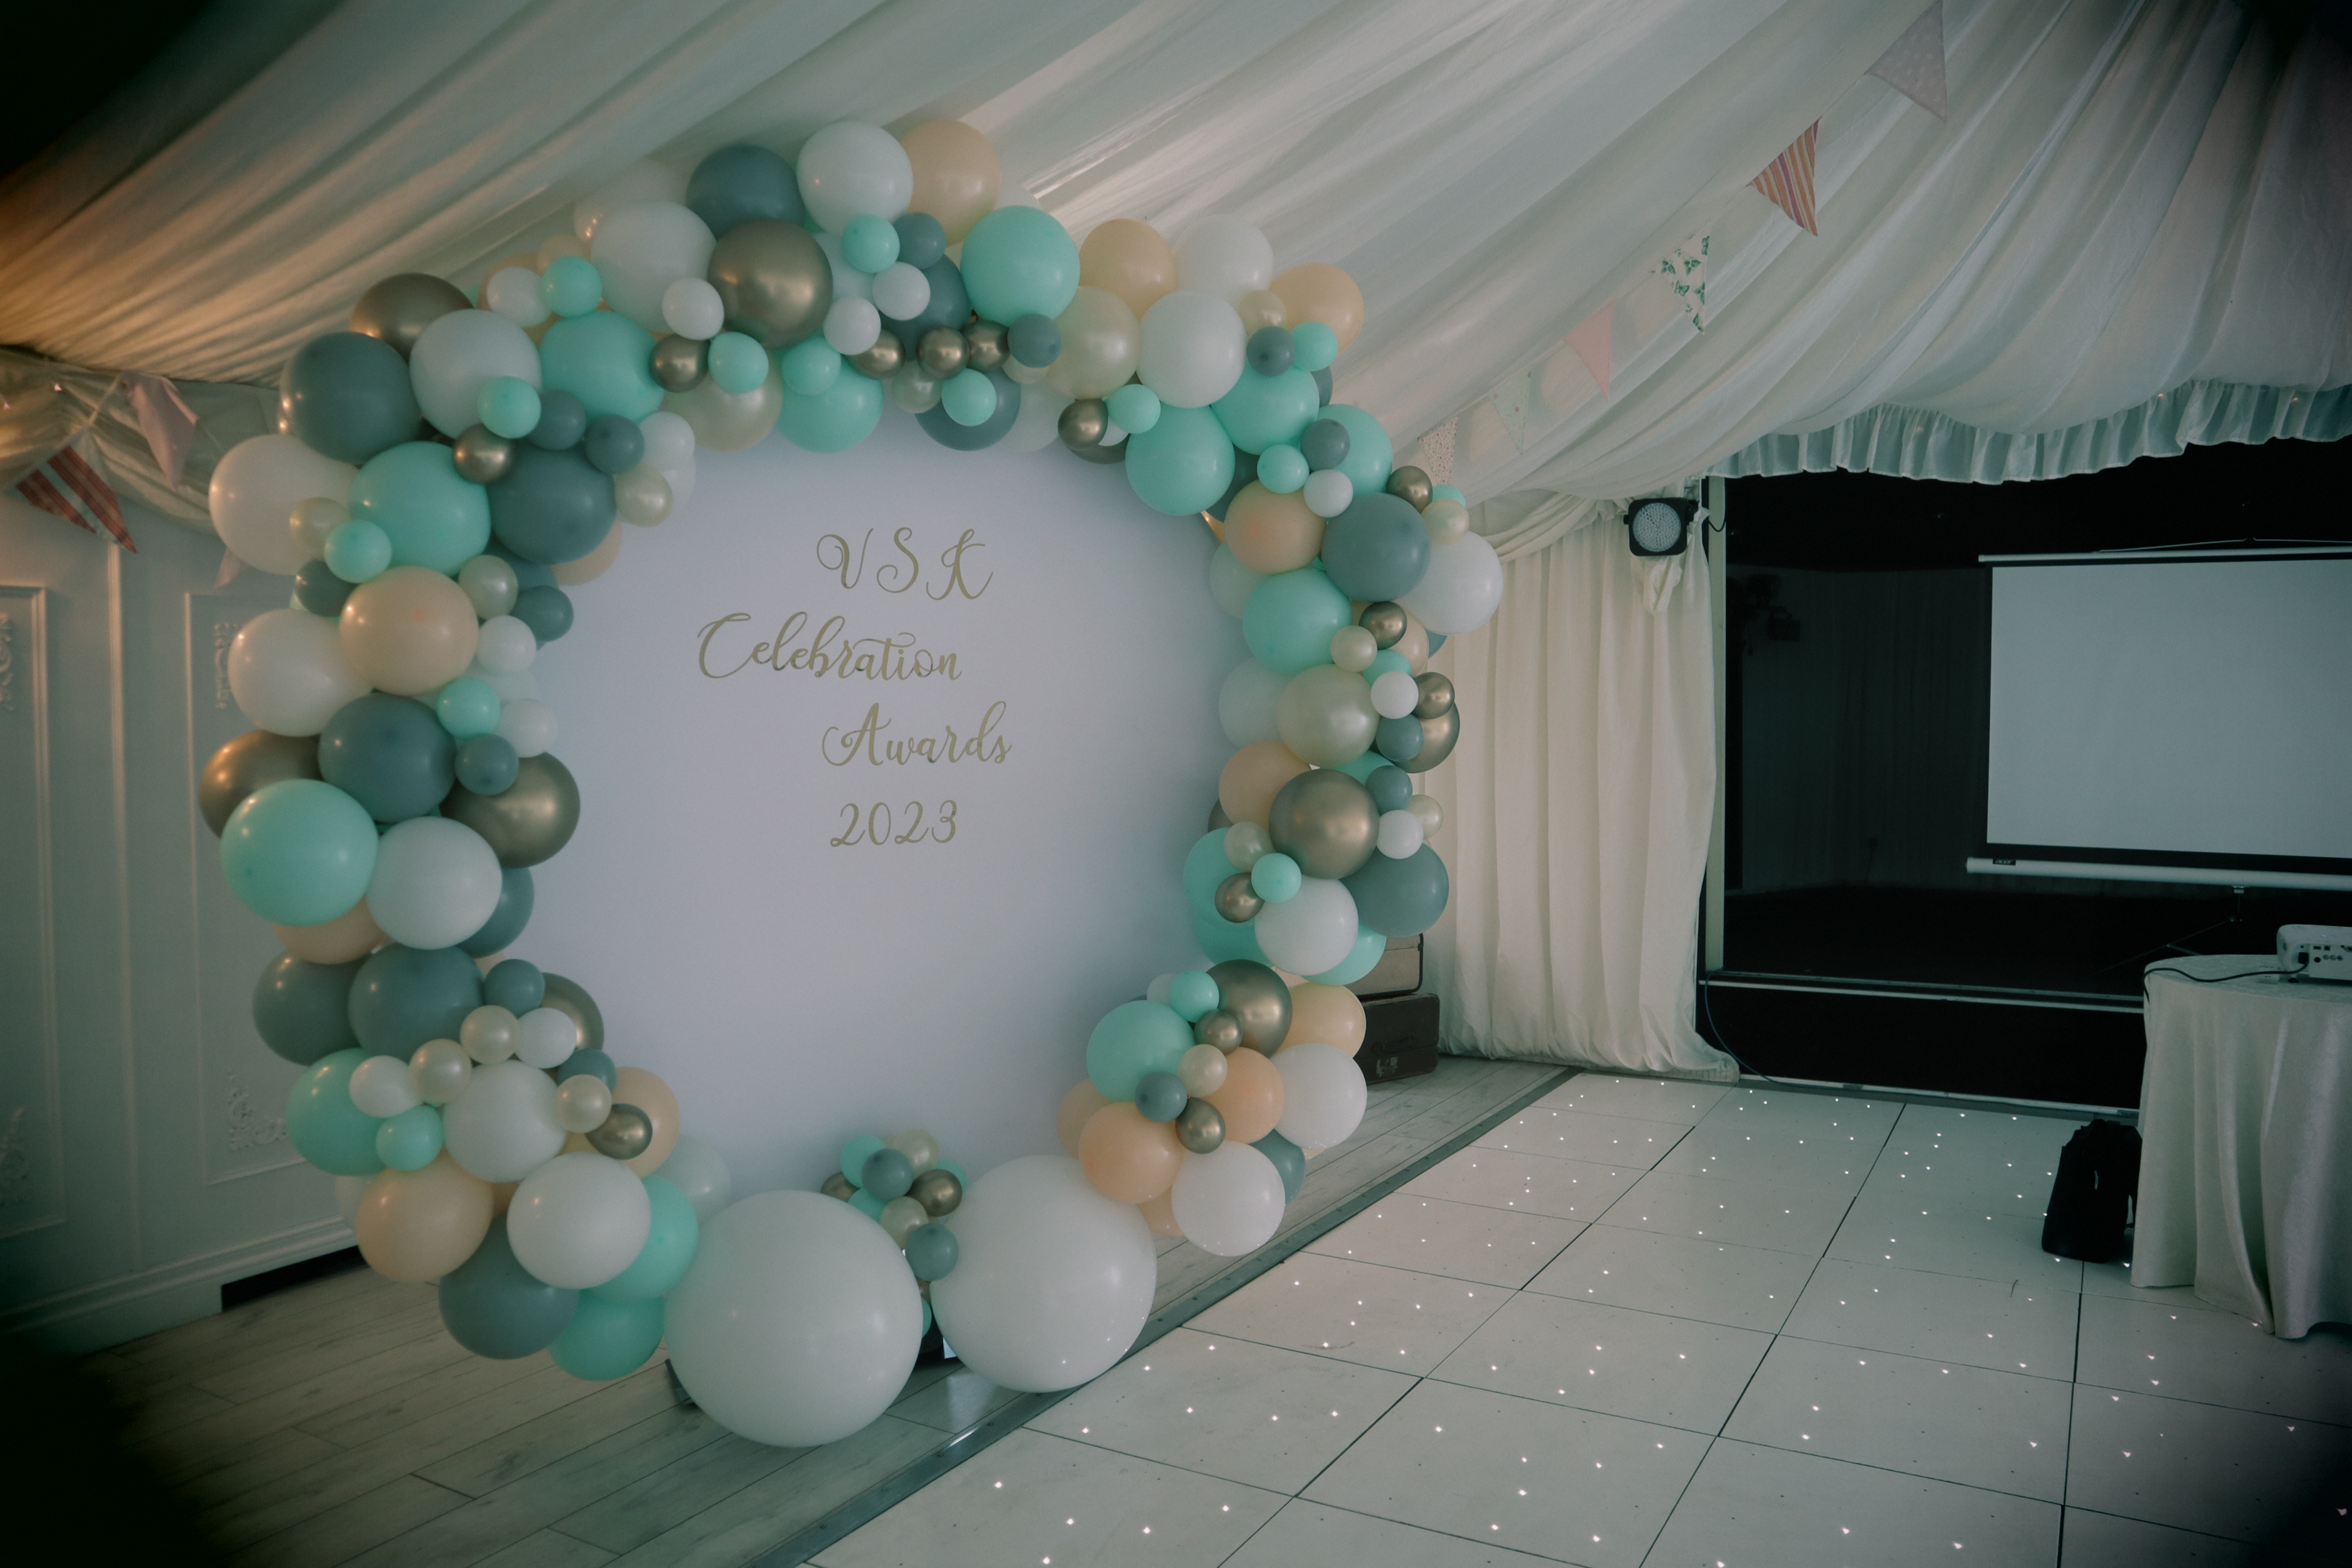 Awards room with a projector, tables and a backdrop with 'VSK Celebration Awards 2023'  framed in green, white and gold balloons